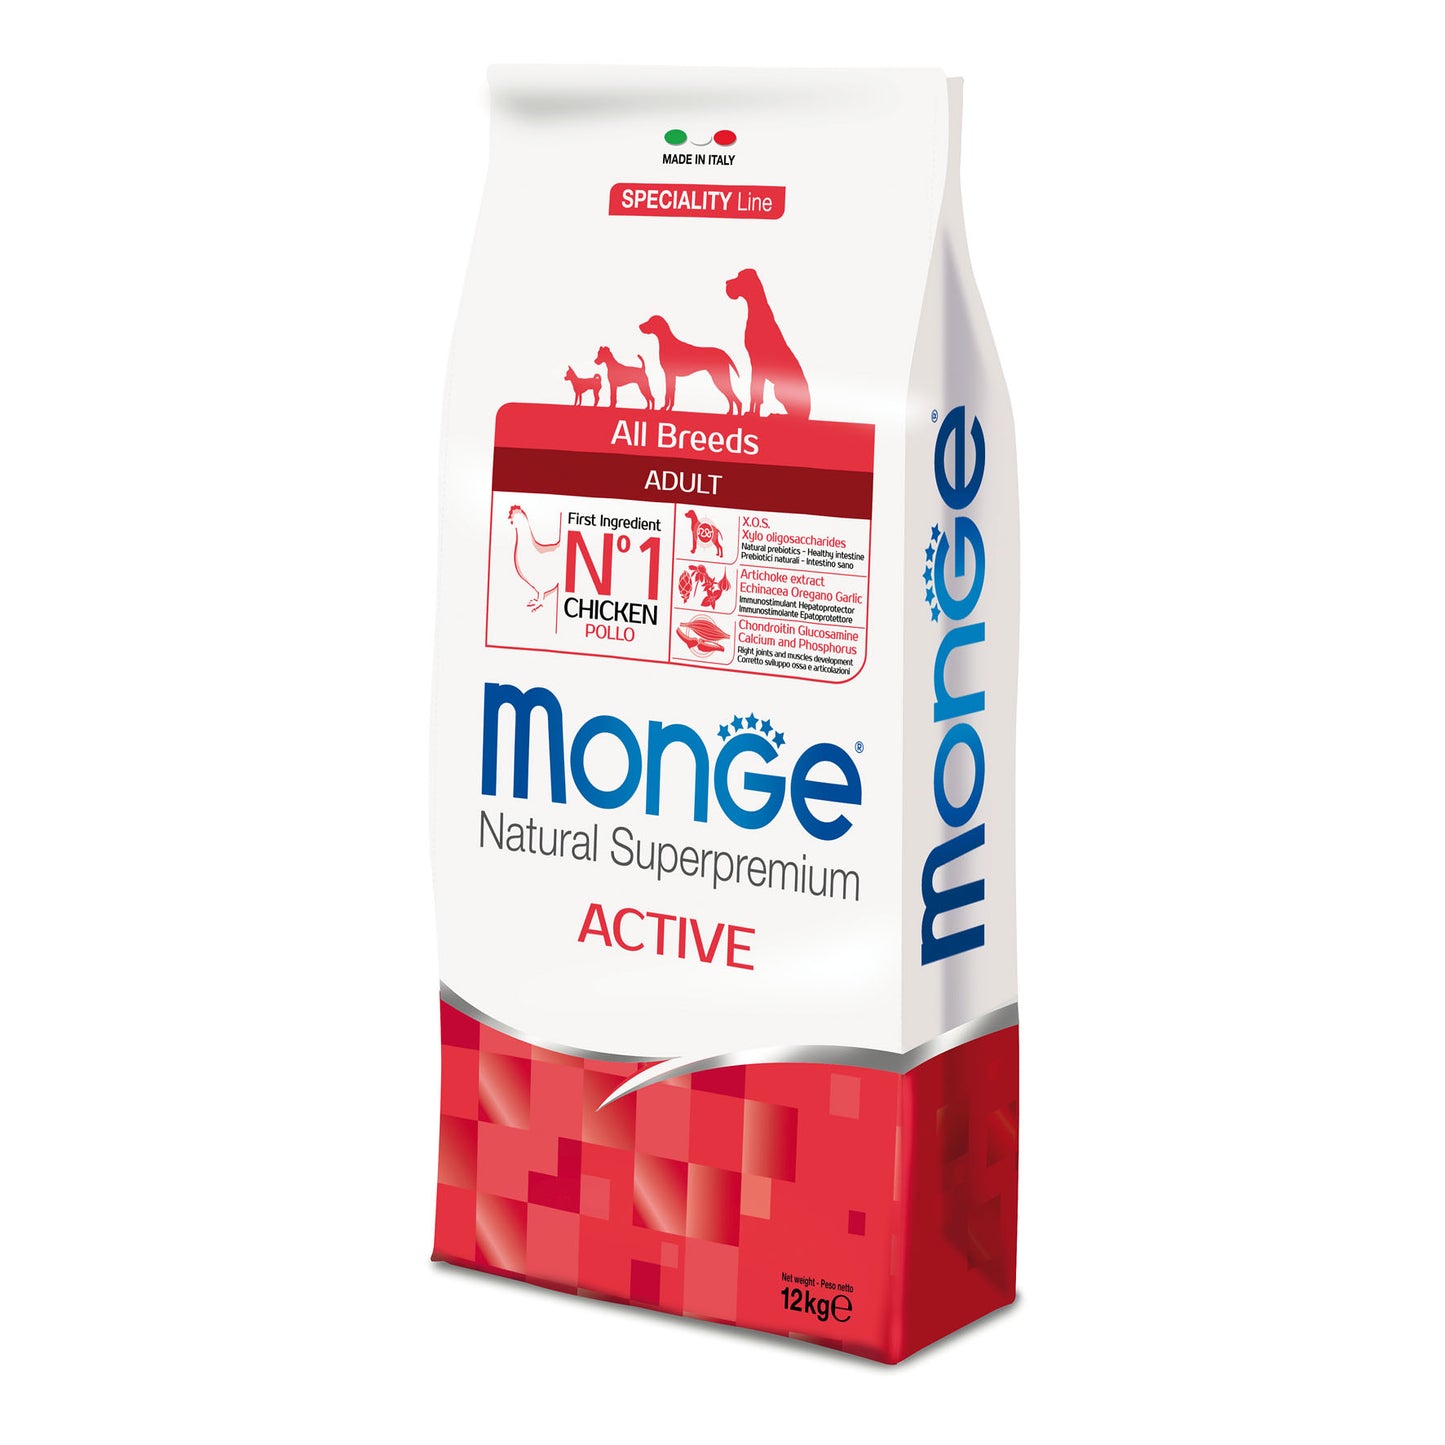 Monge Dog - SPECIALTY Line - Monoprotein - Adult ALL BREEDS Active Chicken